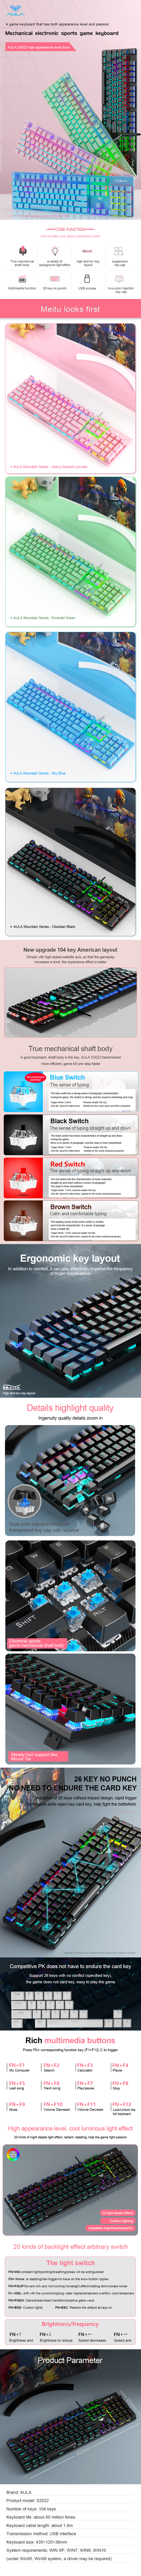 AULA S2022 Black Mechanical Gaming Keyboard Blue Switch,Full Size USB Wired Computer Keyboards(图1)